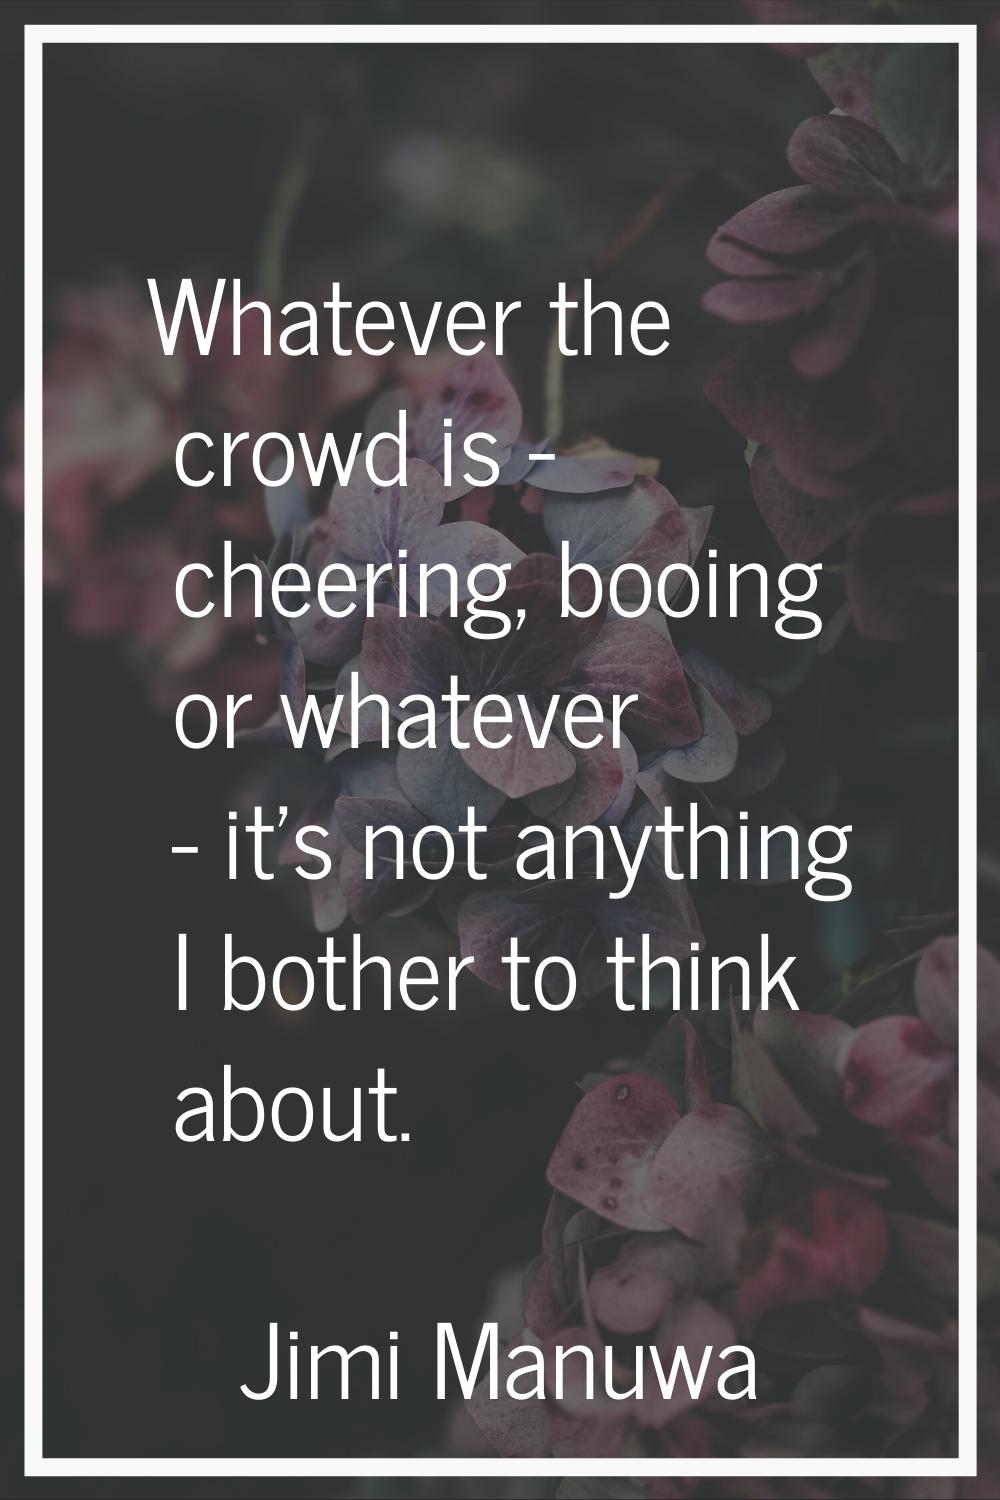 Whatever the crowd is - cheering, booing or whatever - it's not anything I bother to think about.